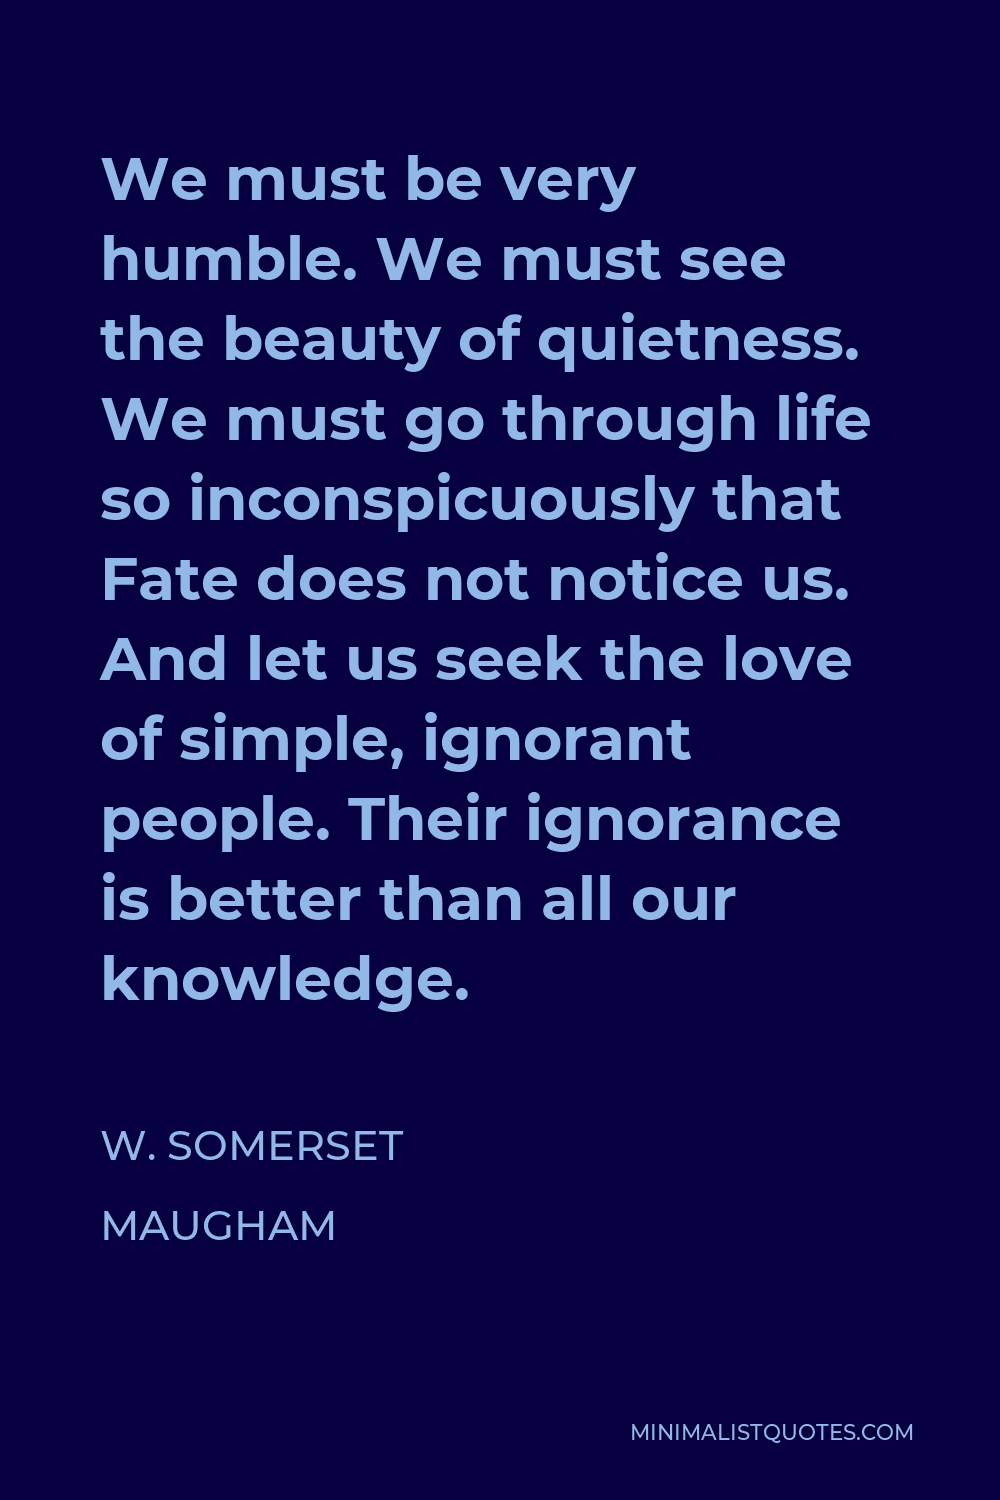 W. Somerset Maugham Quote - We must be very humble. We must see the beauty of quietness. We must go through life so inconspicuously that Fate does not notice us. And let us seek the love of simple, ignorant people. Their ignorance is better than all our knowledge.